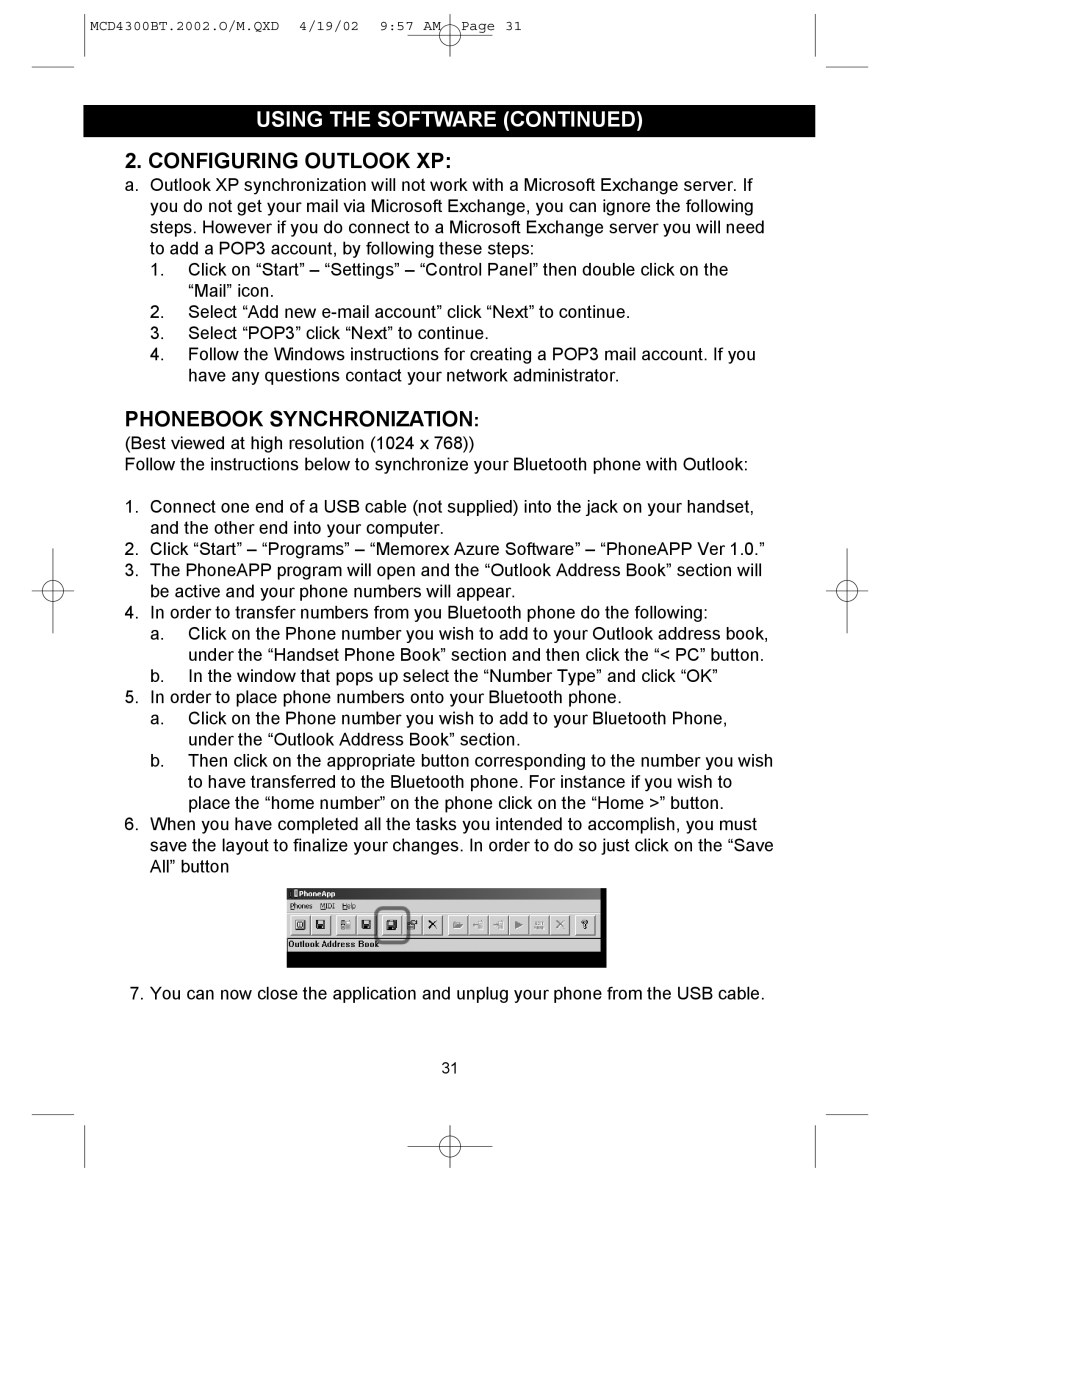 Memorex MCD4300BT operating instructions Using The Software Continued, Configuring Outlook Xp, Phonebook Synchronization 